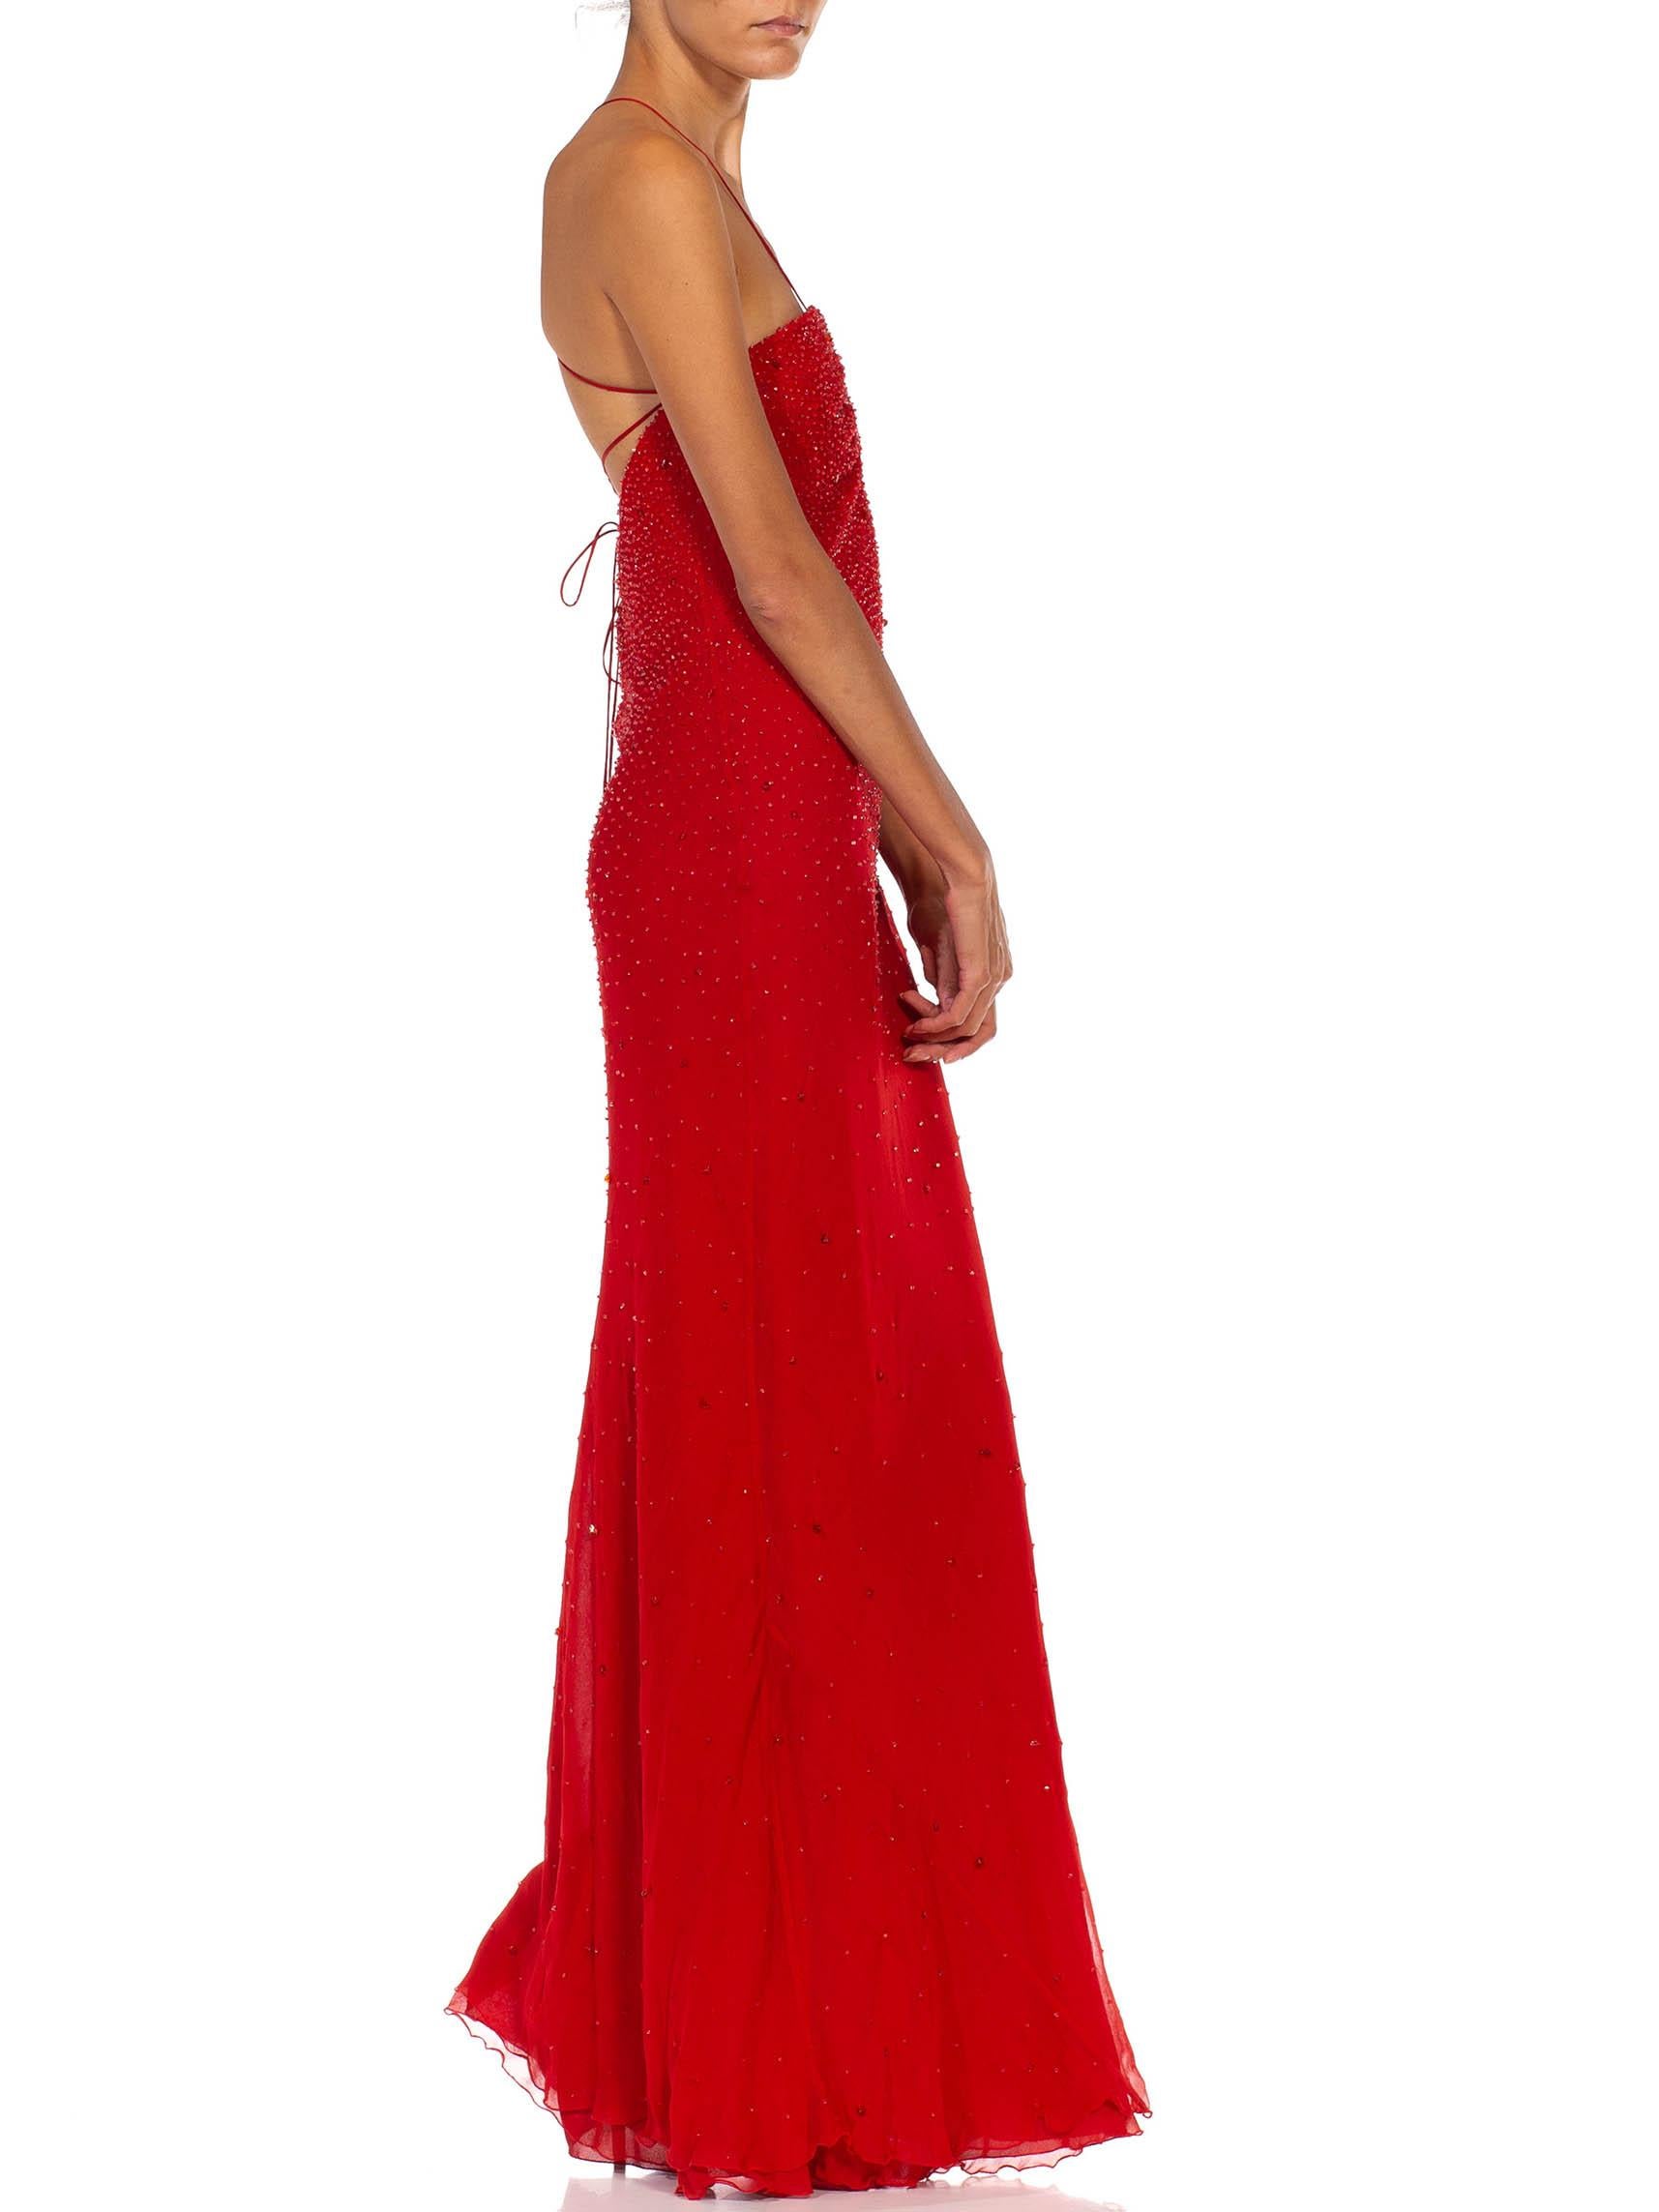 2000S GIORGIO ARMANI Red Bias Cut Silk Chiffon Fully Beaded Gown In Excellent Condition For Sale In New York, NY